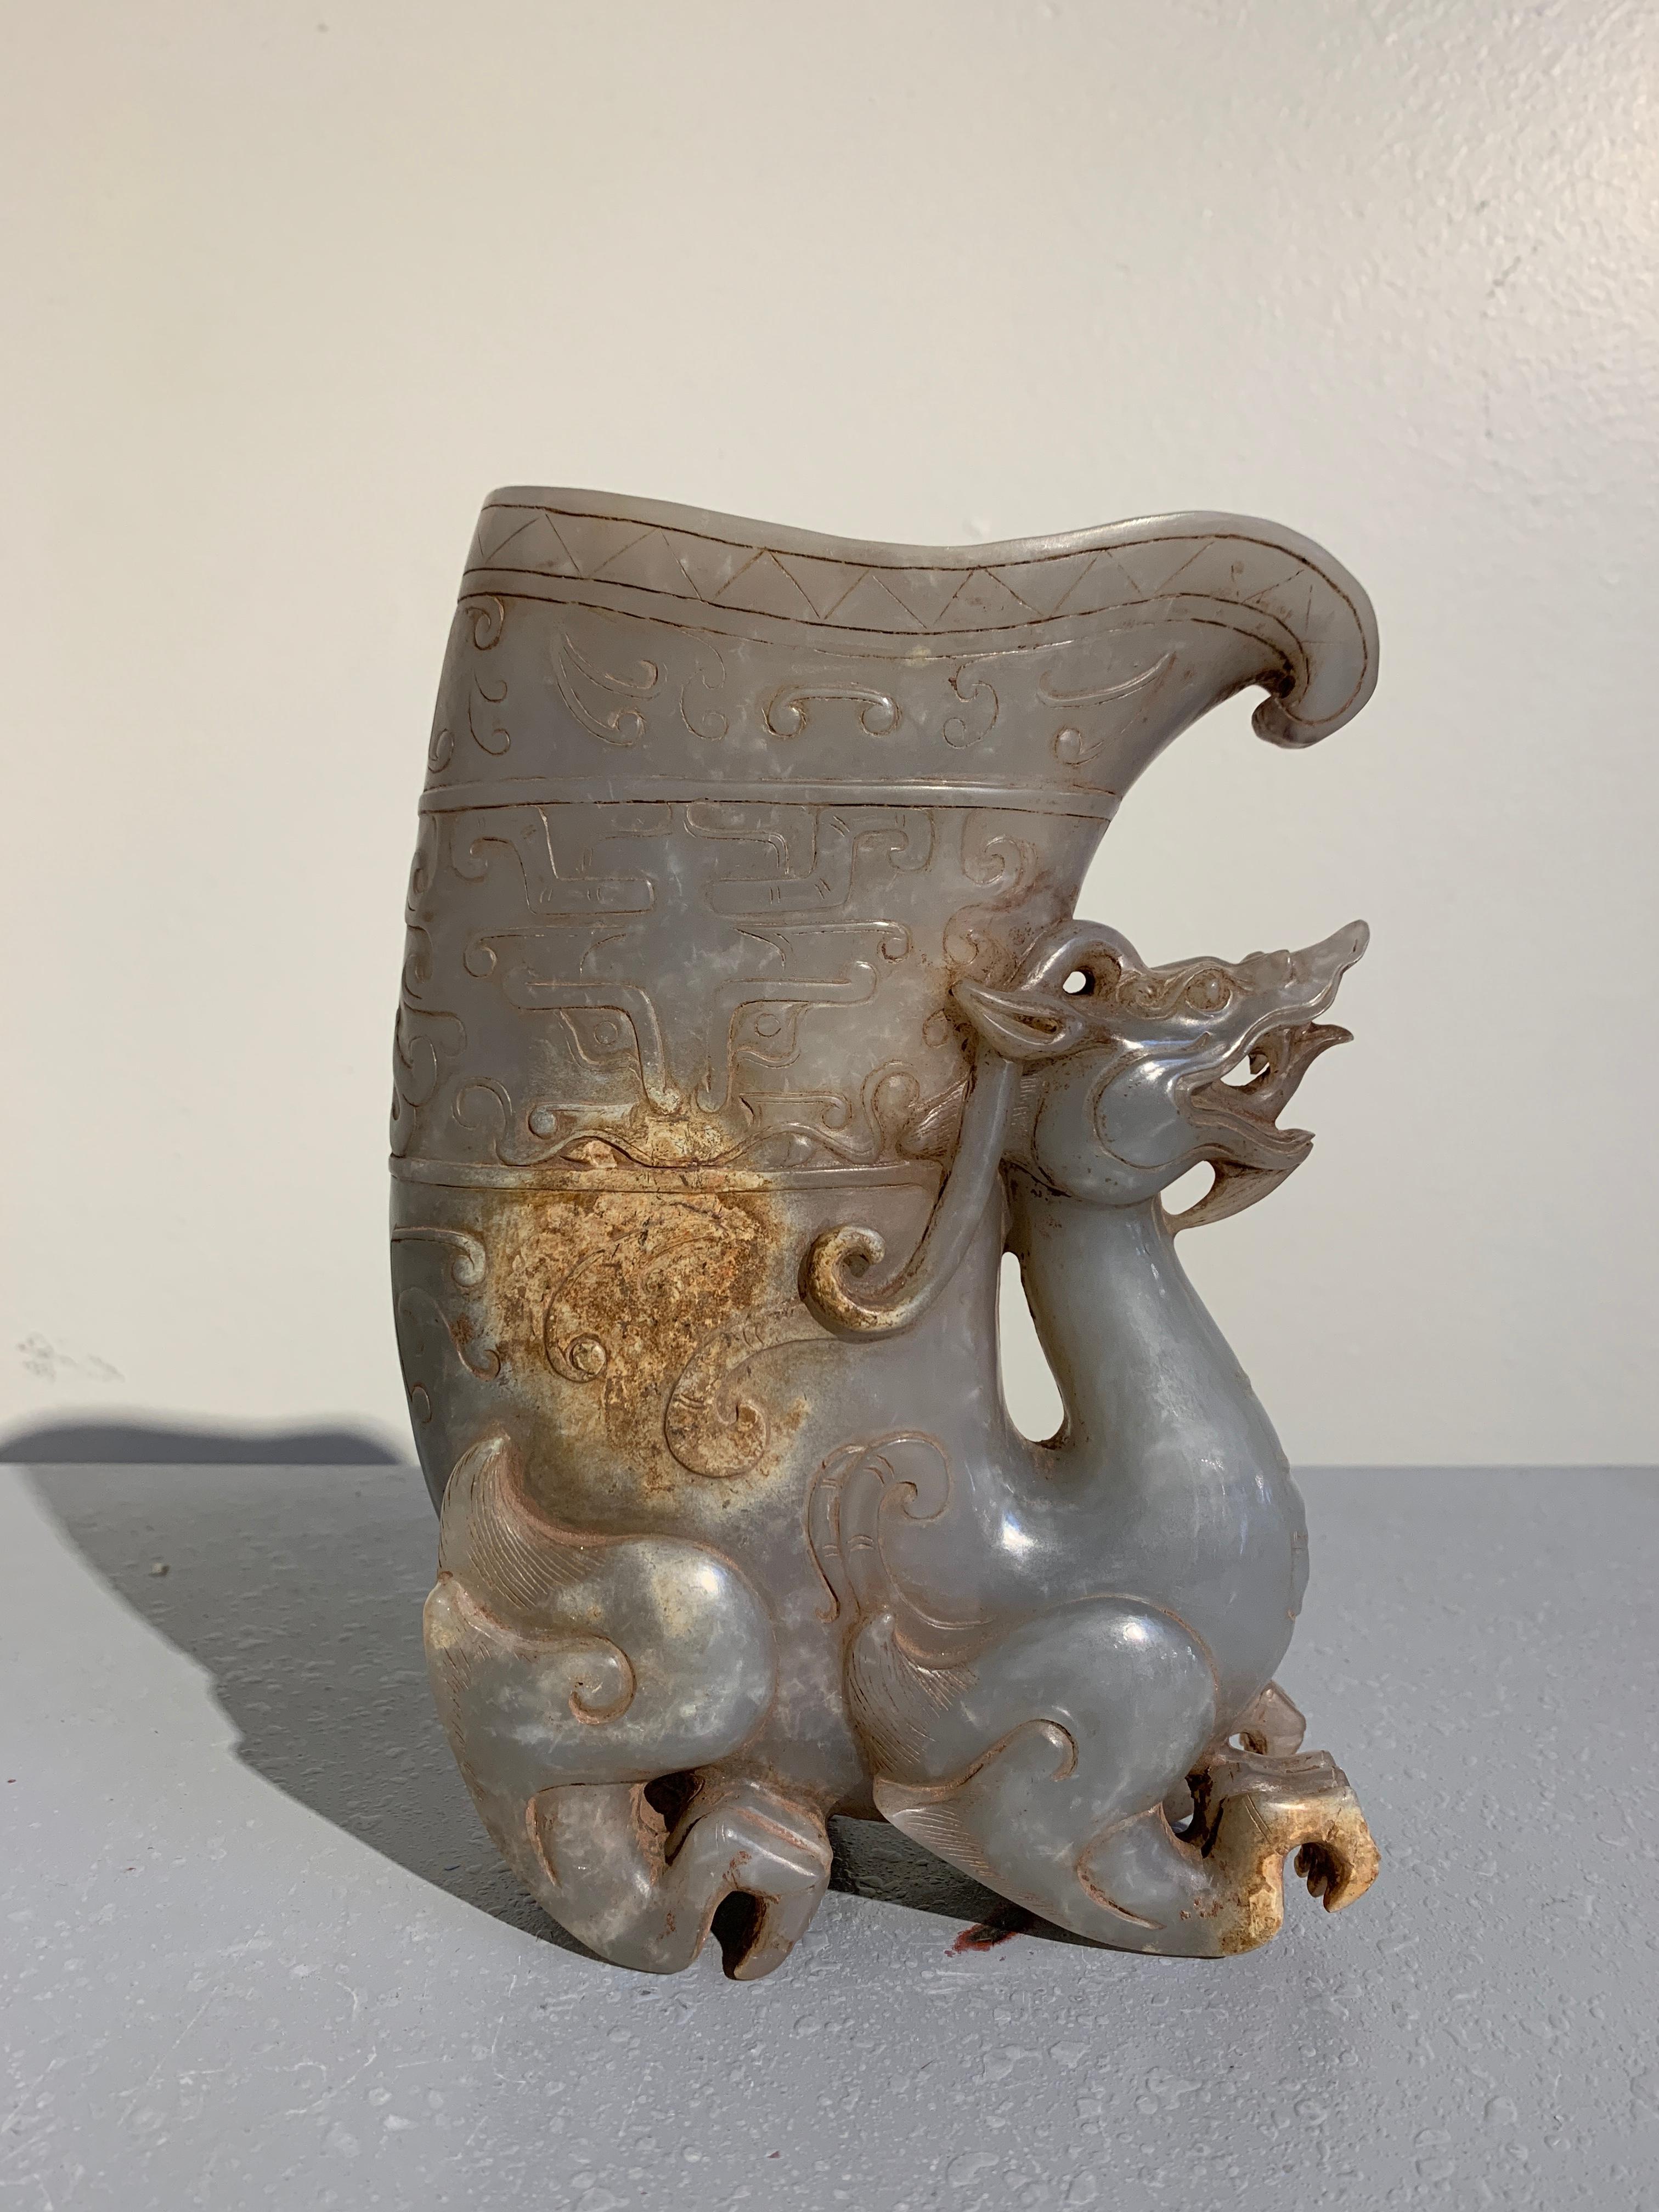 An early 20th century Chinese Republic period carved hardstone drinking vessel, called a rhyton, in the form of a mythical pixiu. 

The archaistic vessel carved in the Han Dynasty style from a single block of lavender gray nephrite and featuring a